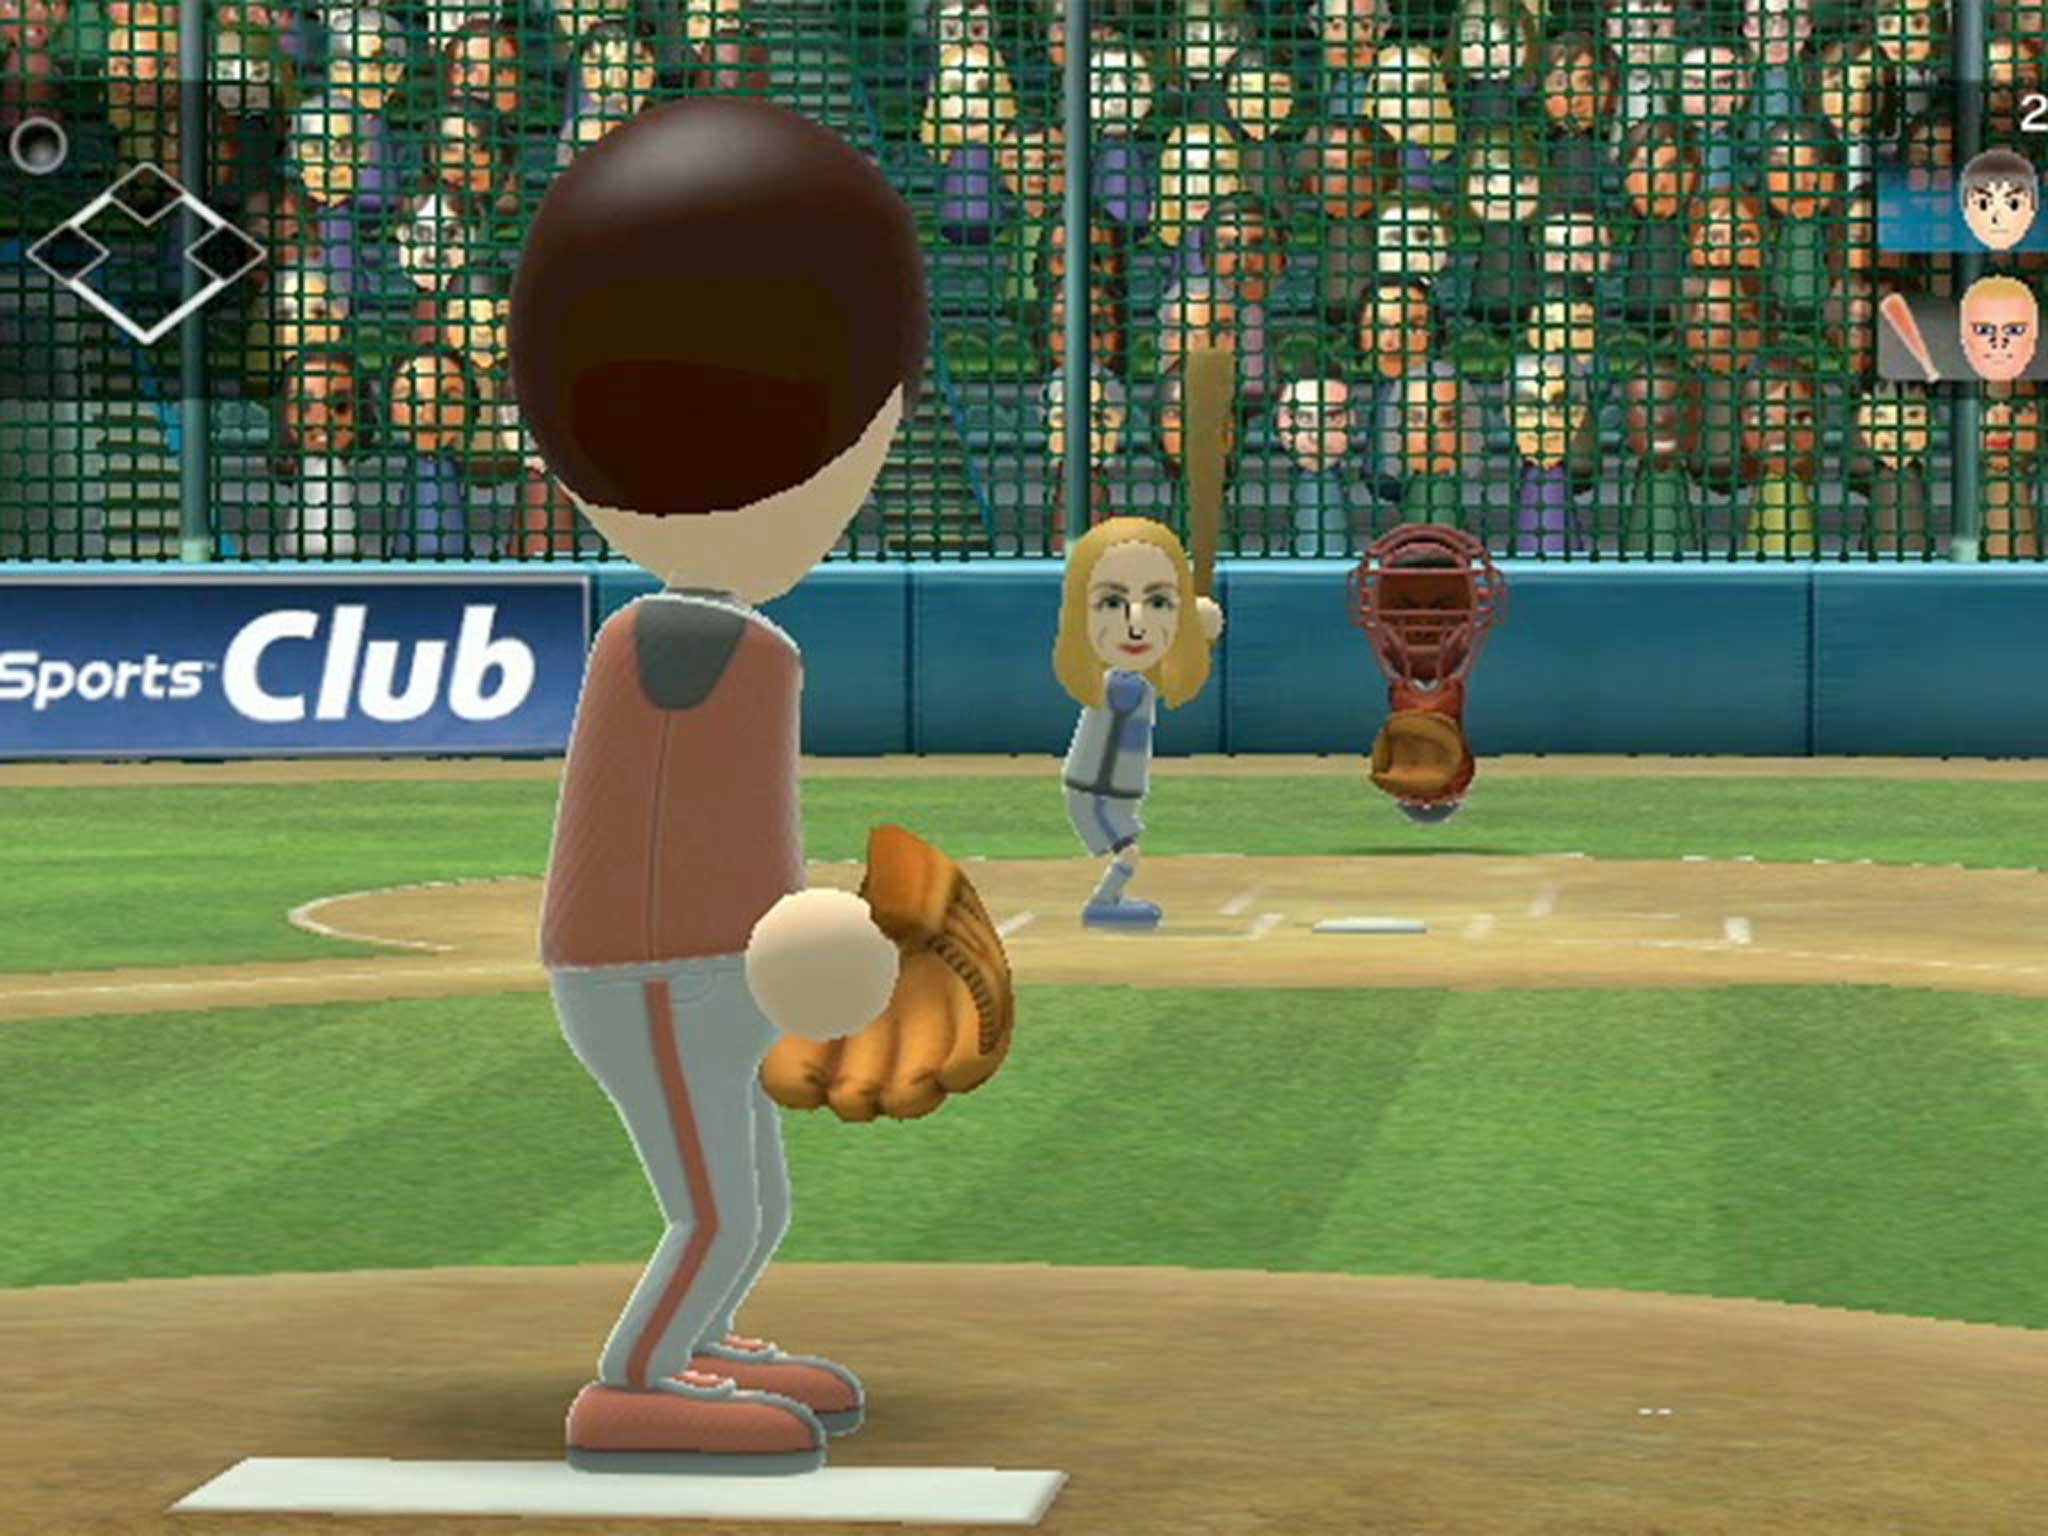 Baseball makes good application of the GamePad in Wii Sports Club